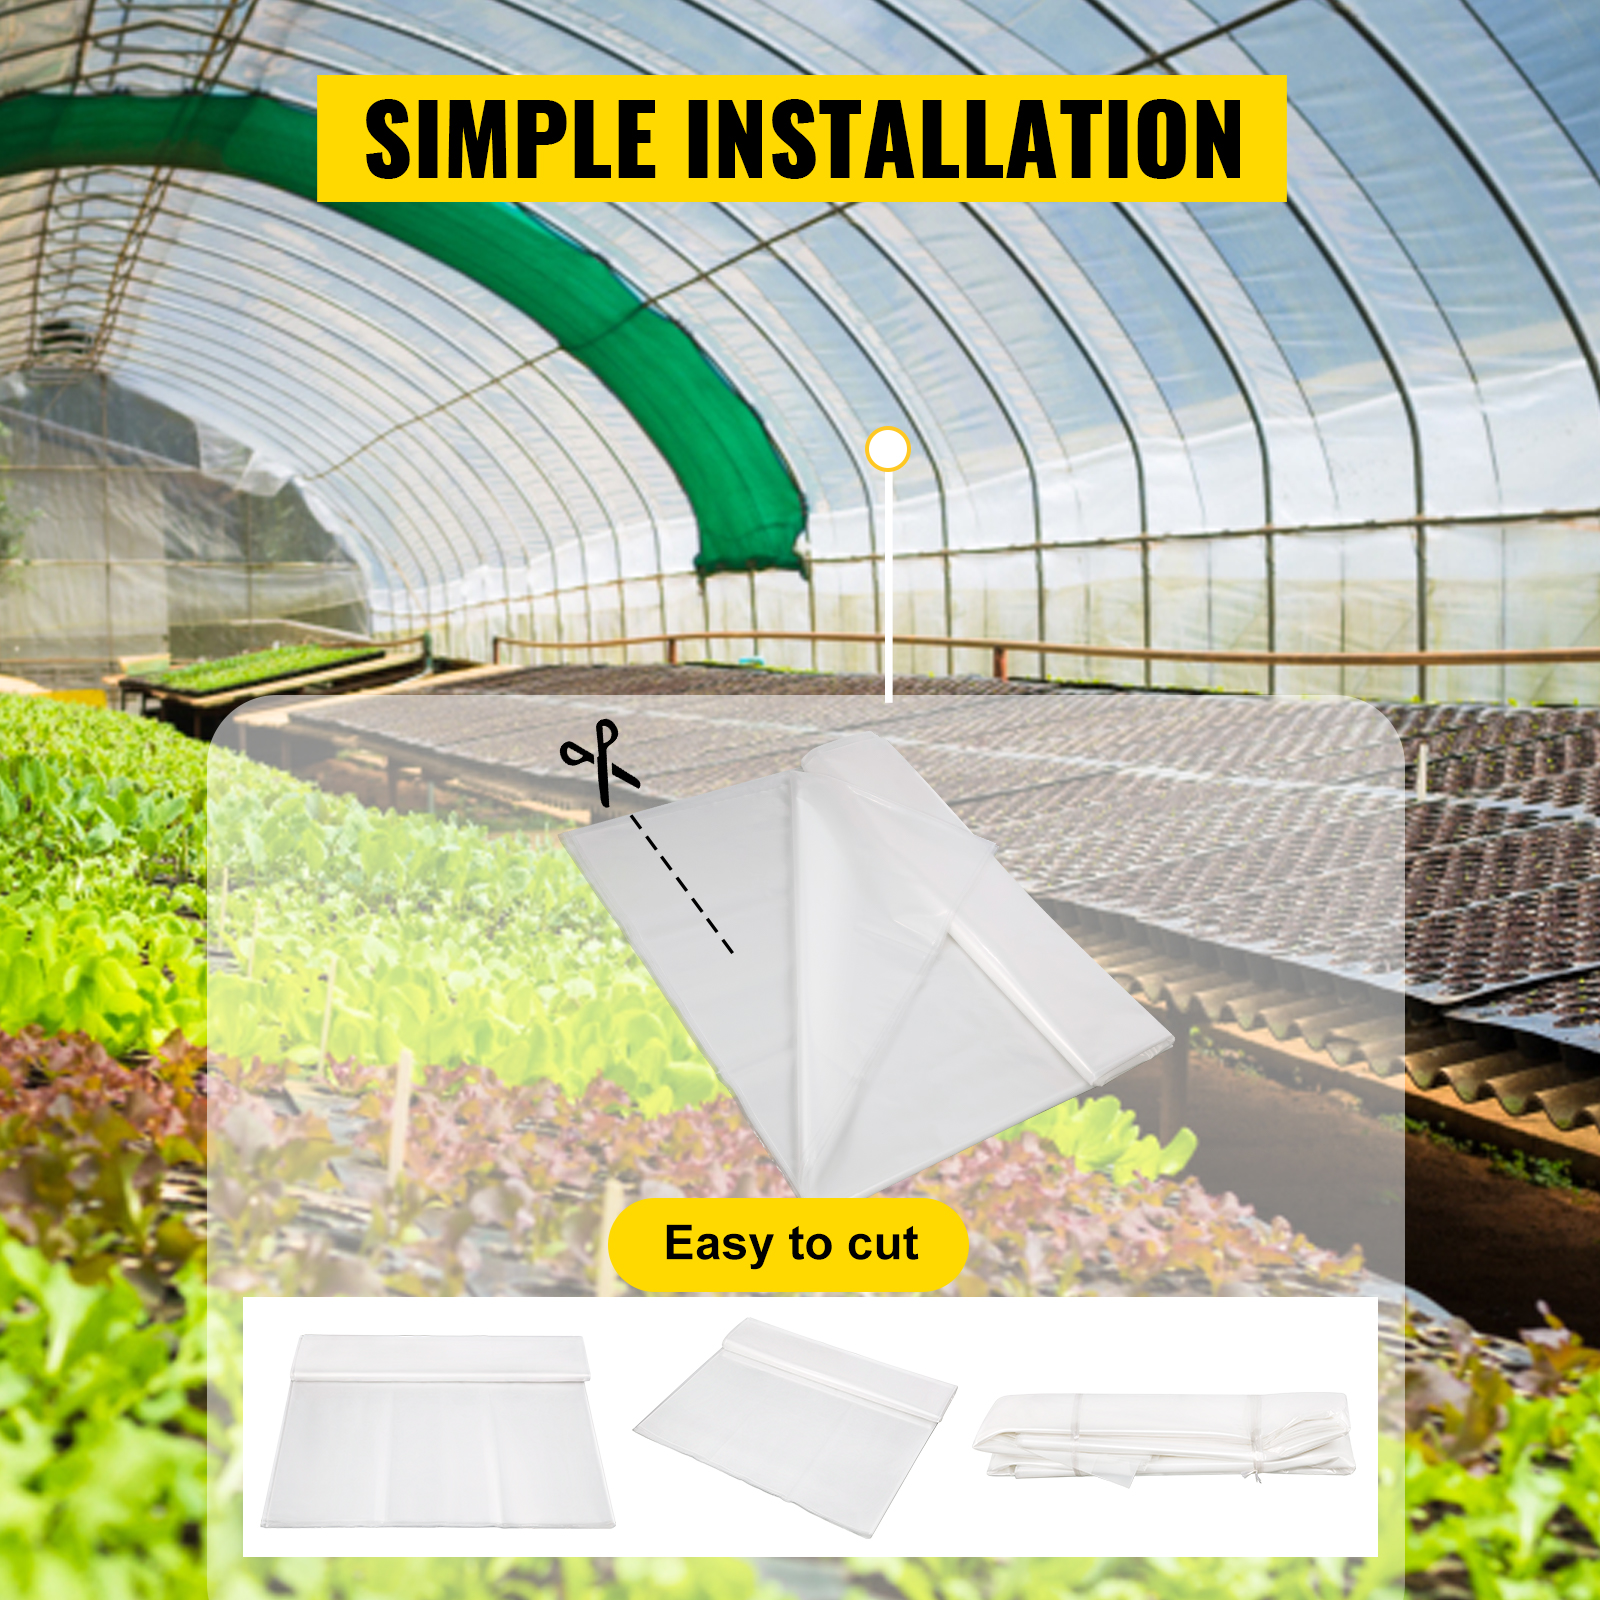  Farm Plastic Supply - Clear Greenhouse Plastic Sheeting - Ultra  Durable - 8 mil - (26' x 20') - 4 Year UV Resistant Polyethylene Greenhouse  Film for Gardening, Farming, Agriculture : Patio, Lawn & Garden